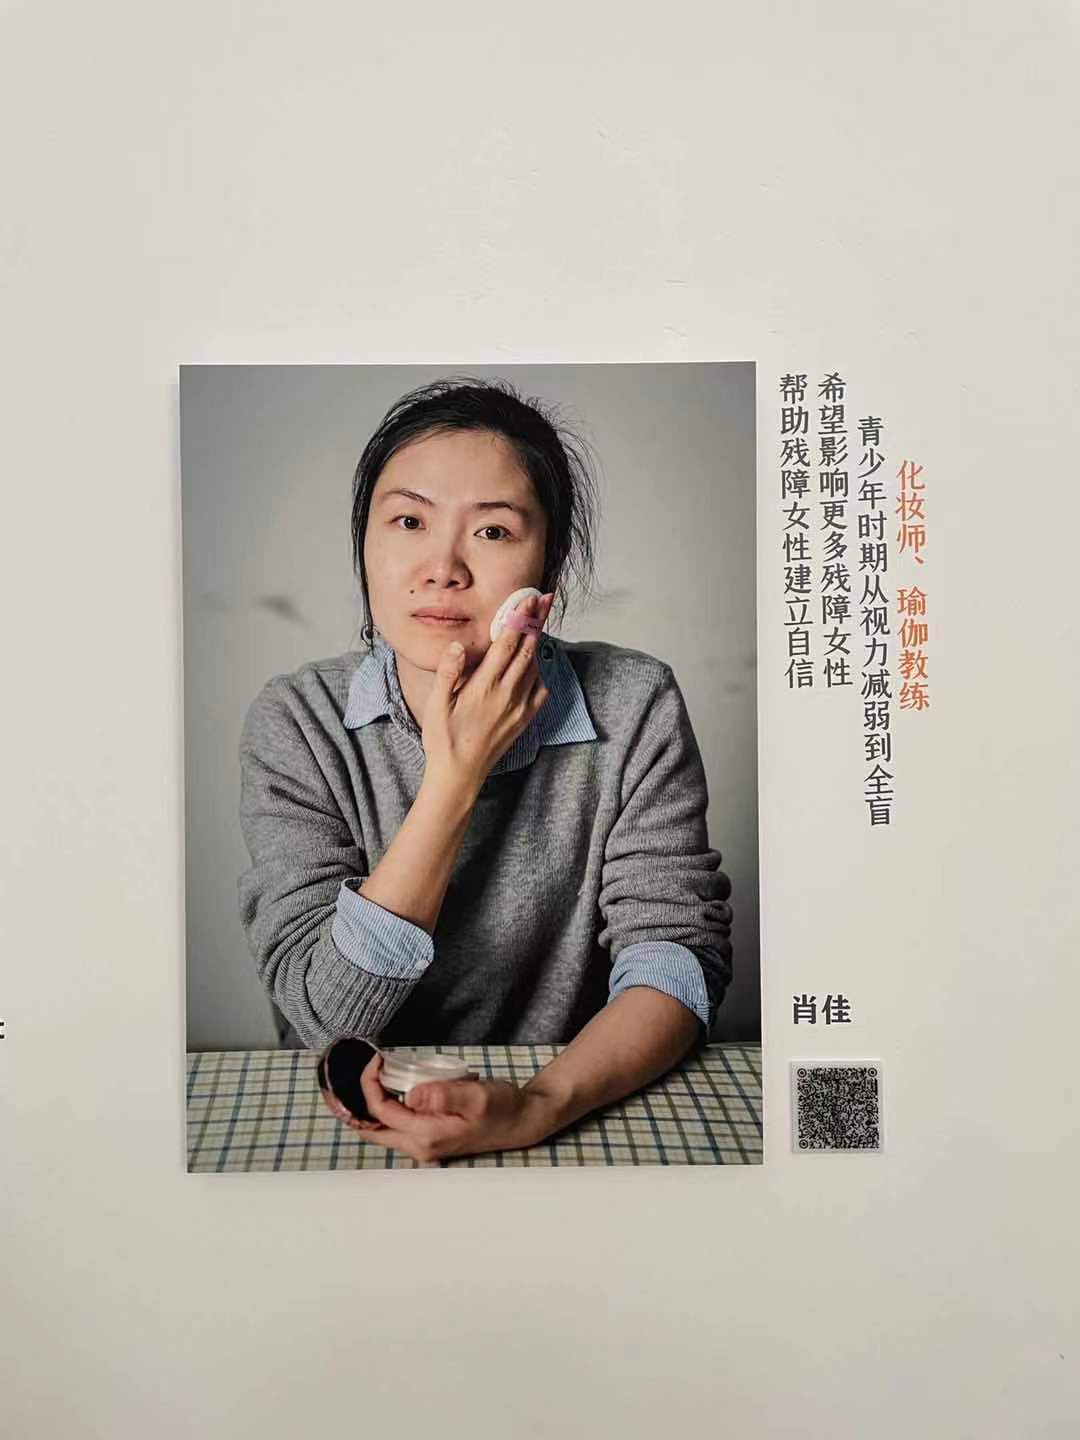 Danish Culture Center in Beijing’s Photo exhibition features stories of Chinese and Swedish disabled people